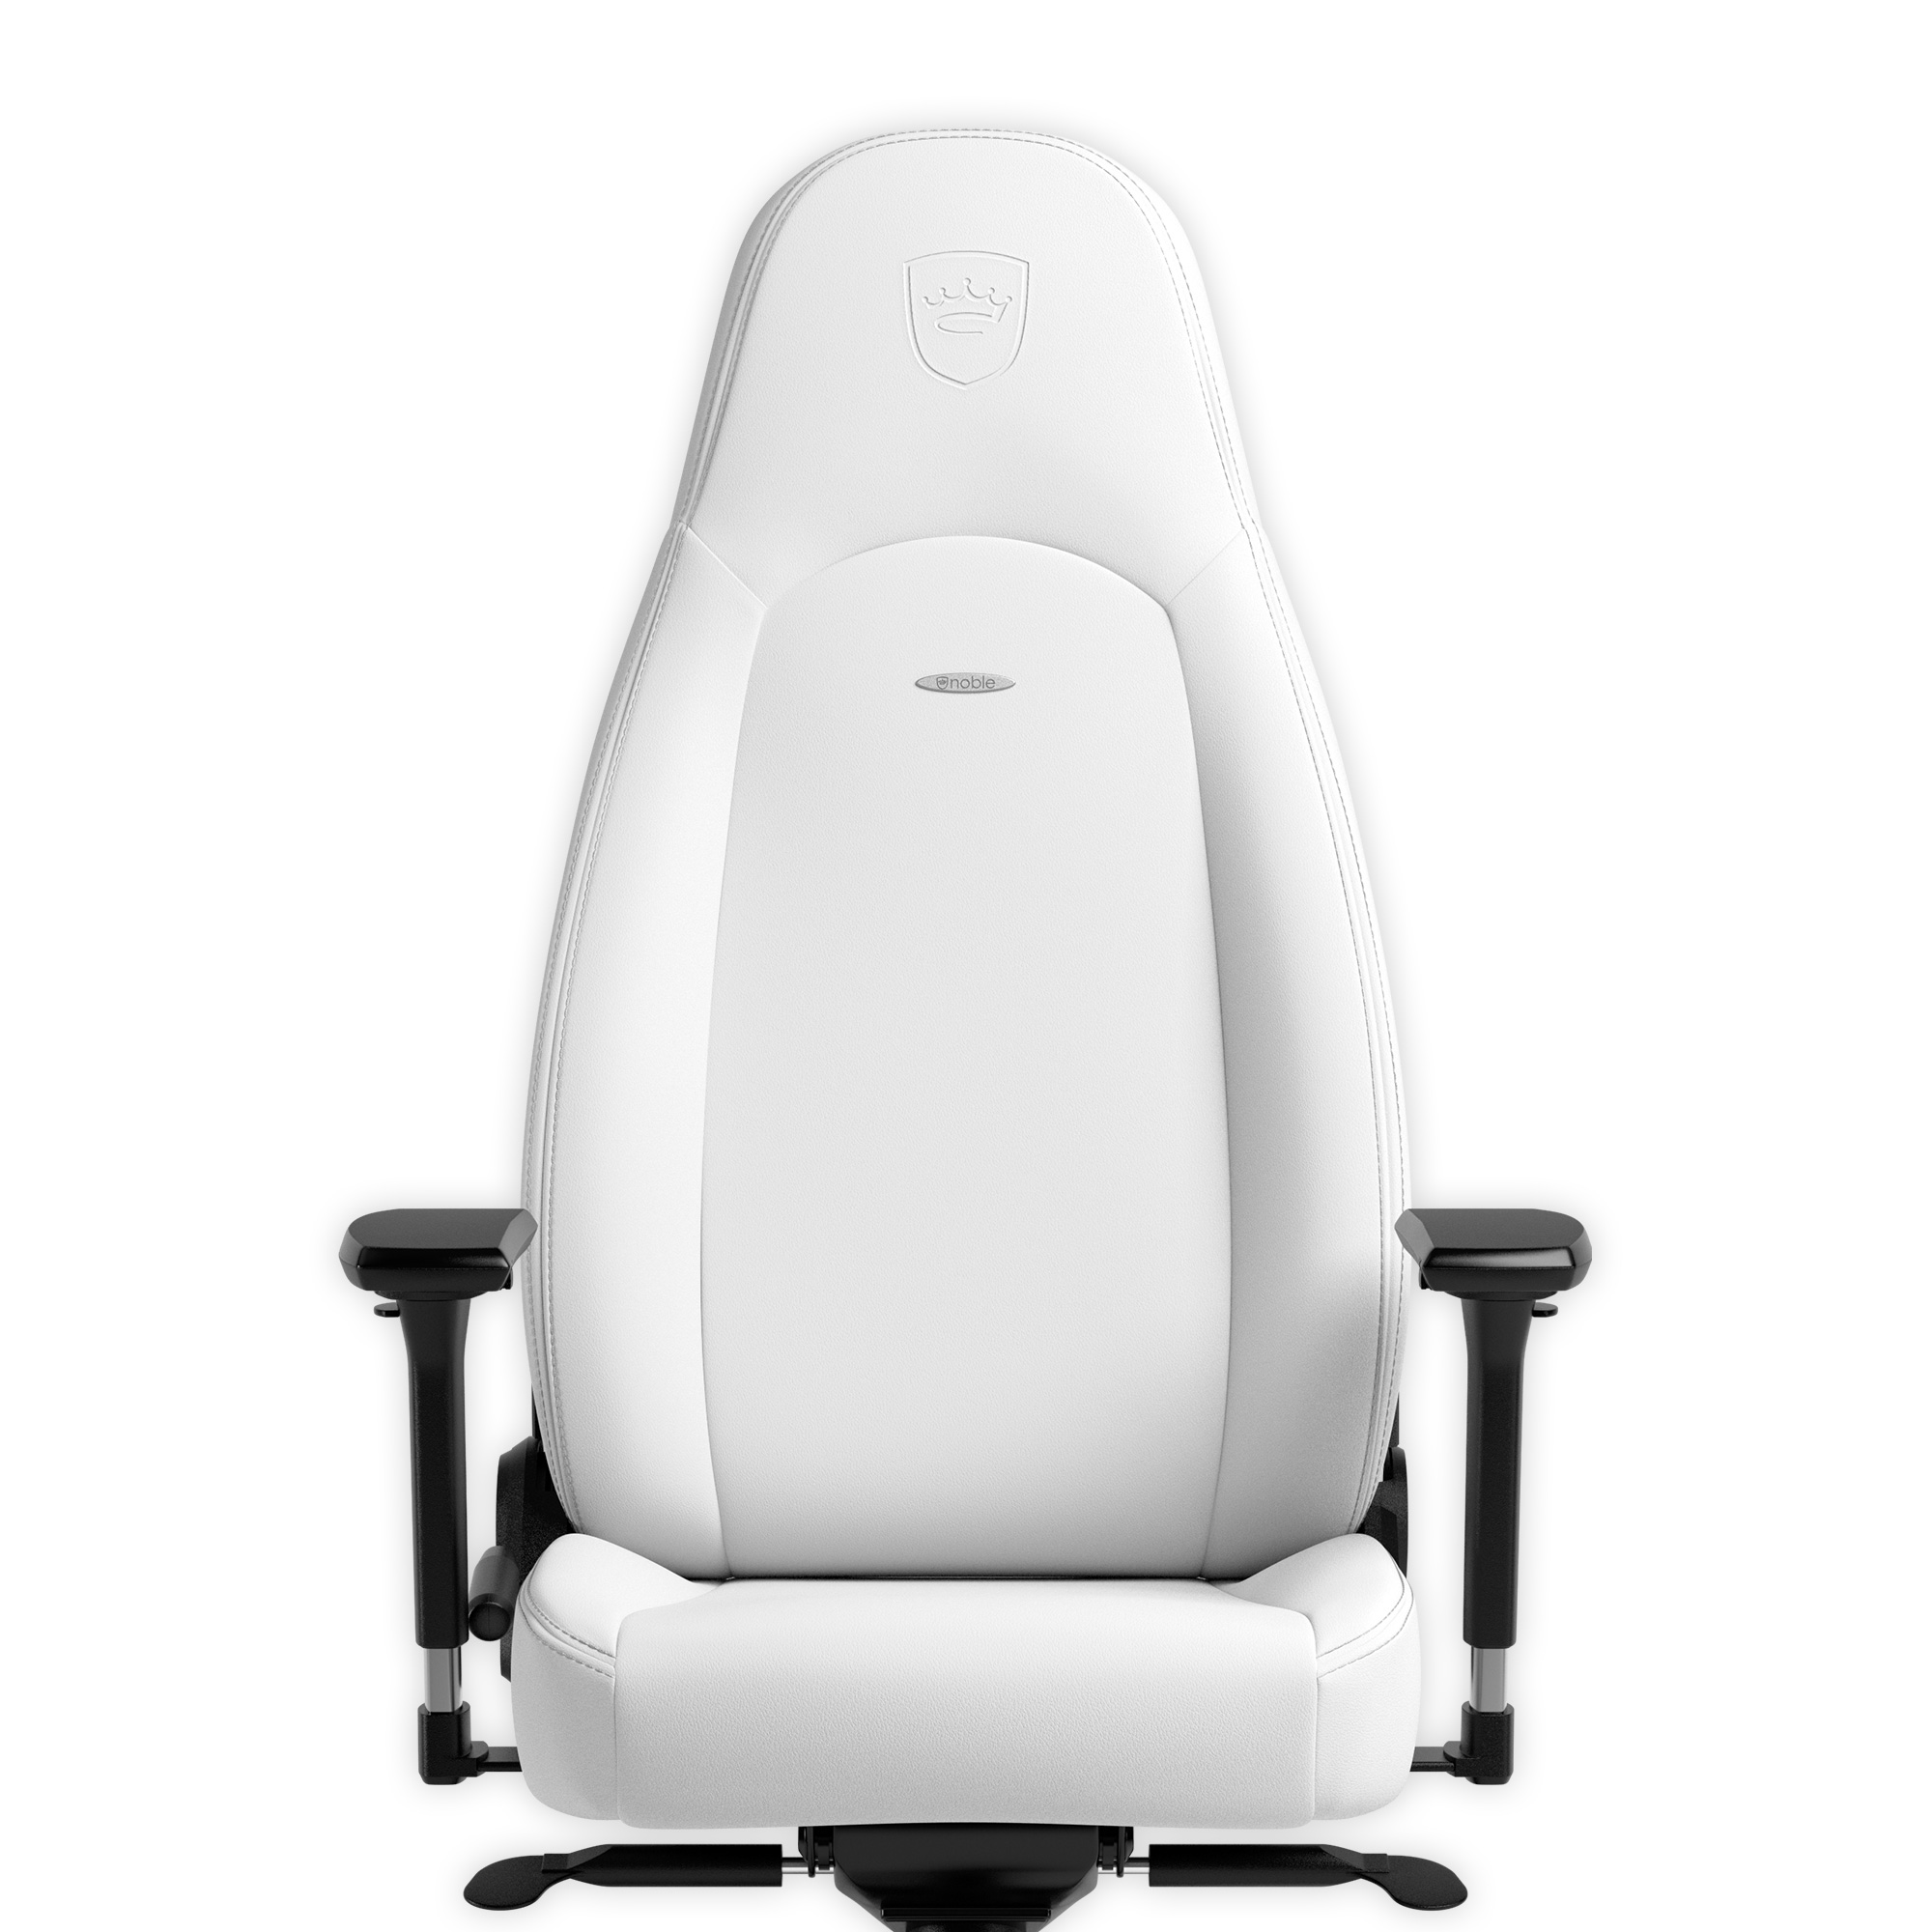 noblechairs - noblechairs ICON Gaming Chair - White Edition